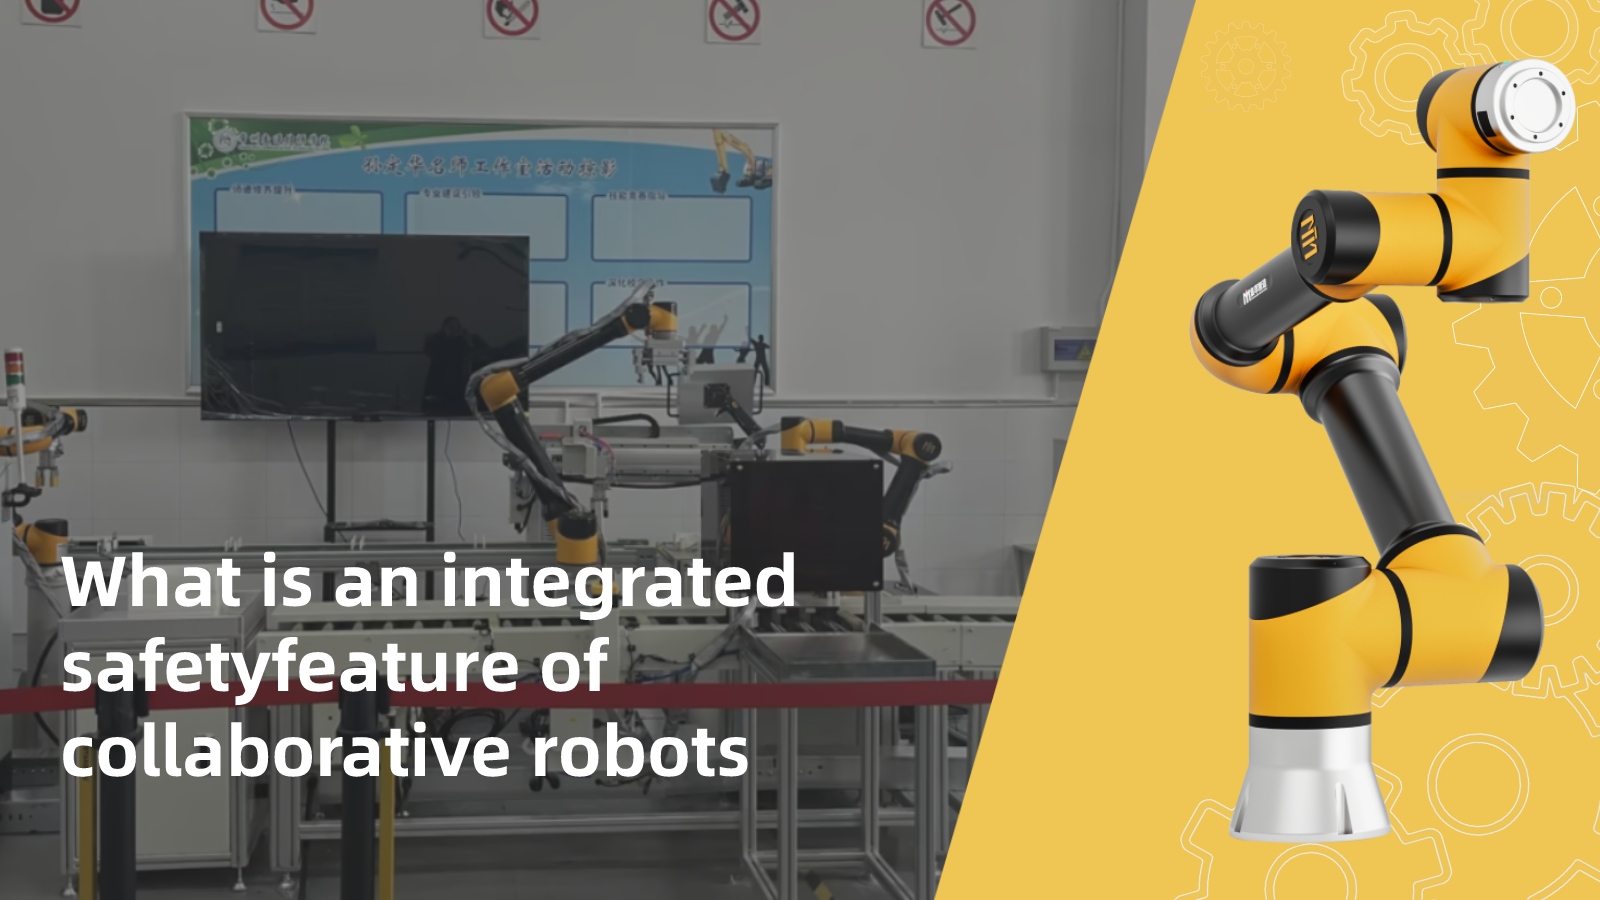 What is an Integrated Safety Feature of Collaborative Robots?